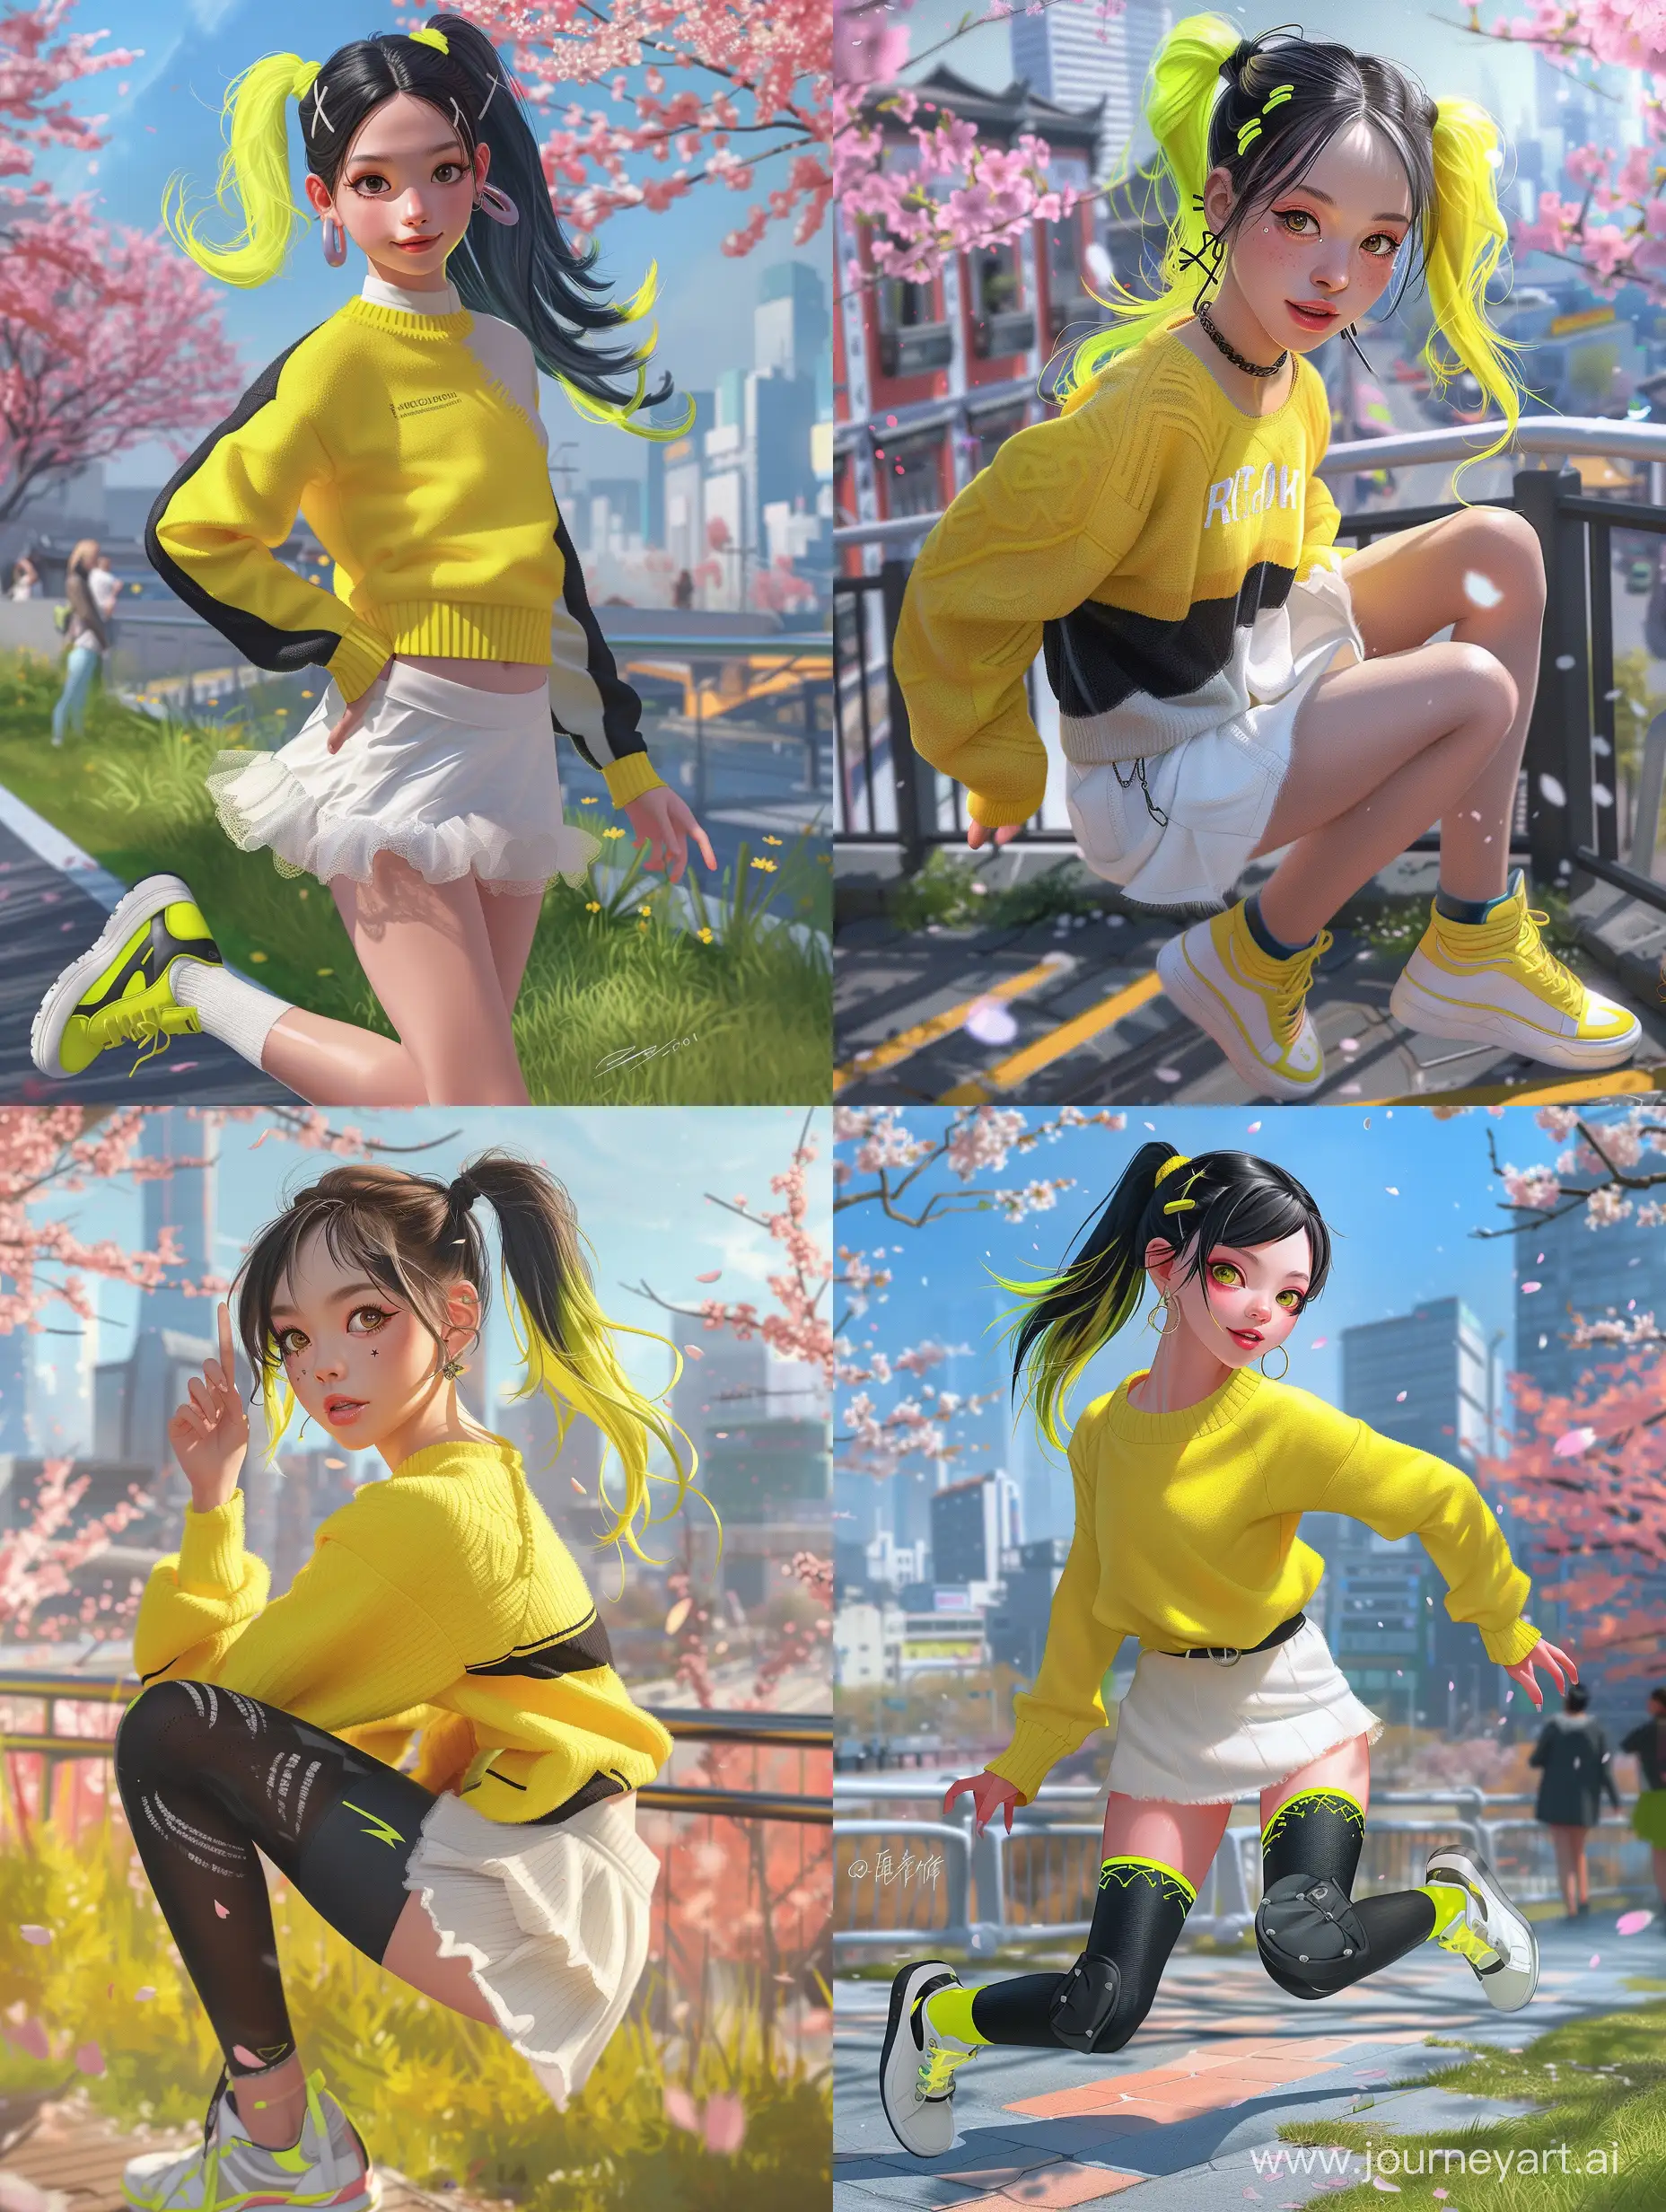 best quality, masterpiece, ultra-detailed, illustration, vibrant colors, cute and lively, 1 girl, young and youthful, solo, Asian background, joyful expression, bright and innocent doe eyes, side ponytail, neon yellow and black two-toned hair, trendy fashion style, yellow sweater and white skirt, comfortable sneakers, dynamic pose, lively movement, natural lighting, sunny outdoor setting, blooming cherry blossom trees, bustling cityscape in the background, happy and carefree atmosphere --v 6 --ar 3:4 --no 81238